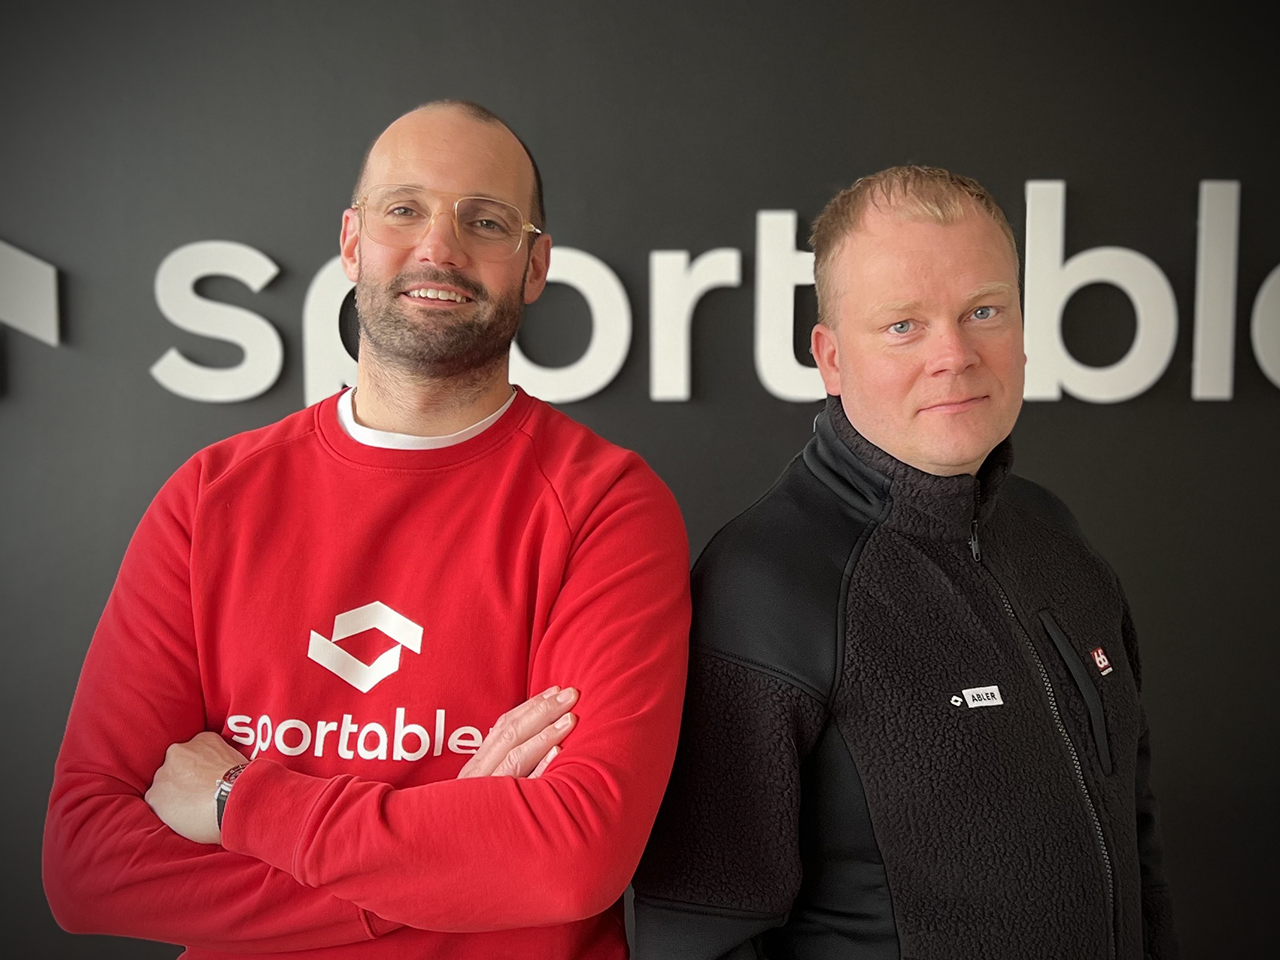 Abler raises $3.7M from Frumtak Ventures to improve sports management